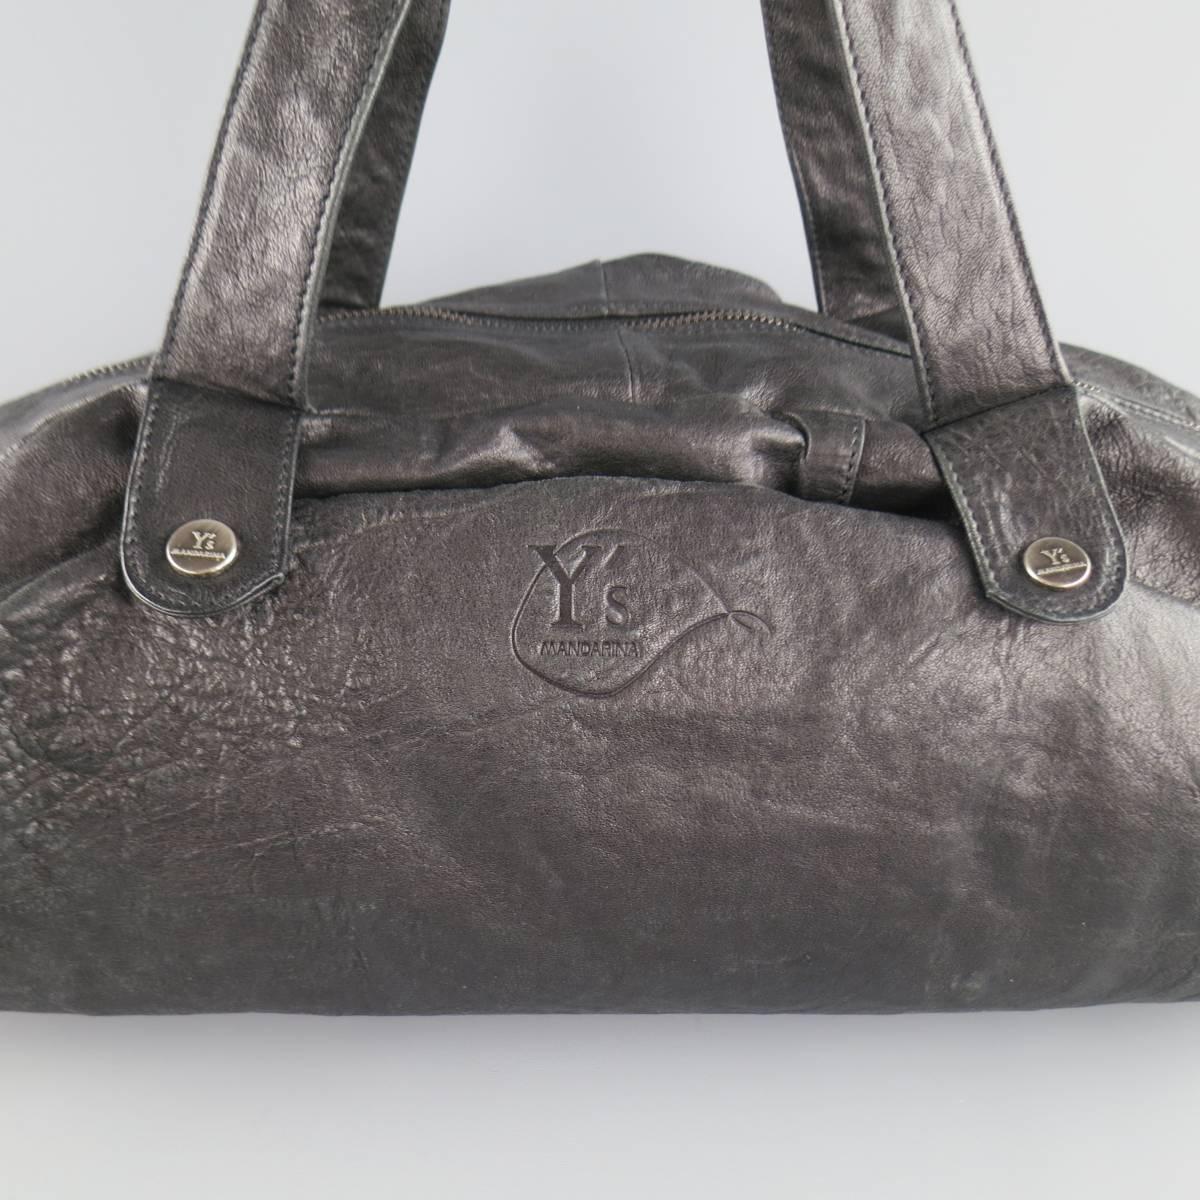 Y's YOHJI YAMAMMOTO x MANDARINA duffle bag comes in soft black textured leather and features double top handles, expandable sides with snaps and hidden zip, and top sip closure. With dust bag.
 
Good Pre-Owned Condition.
 
Measurements:
 
Length: 25